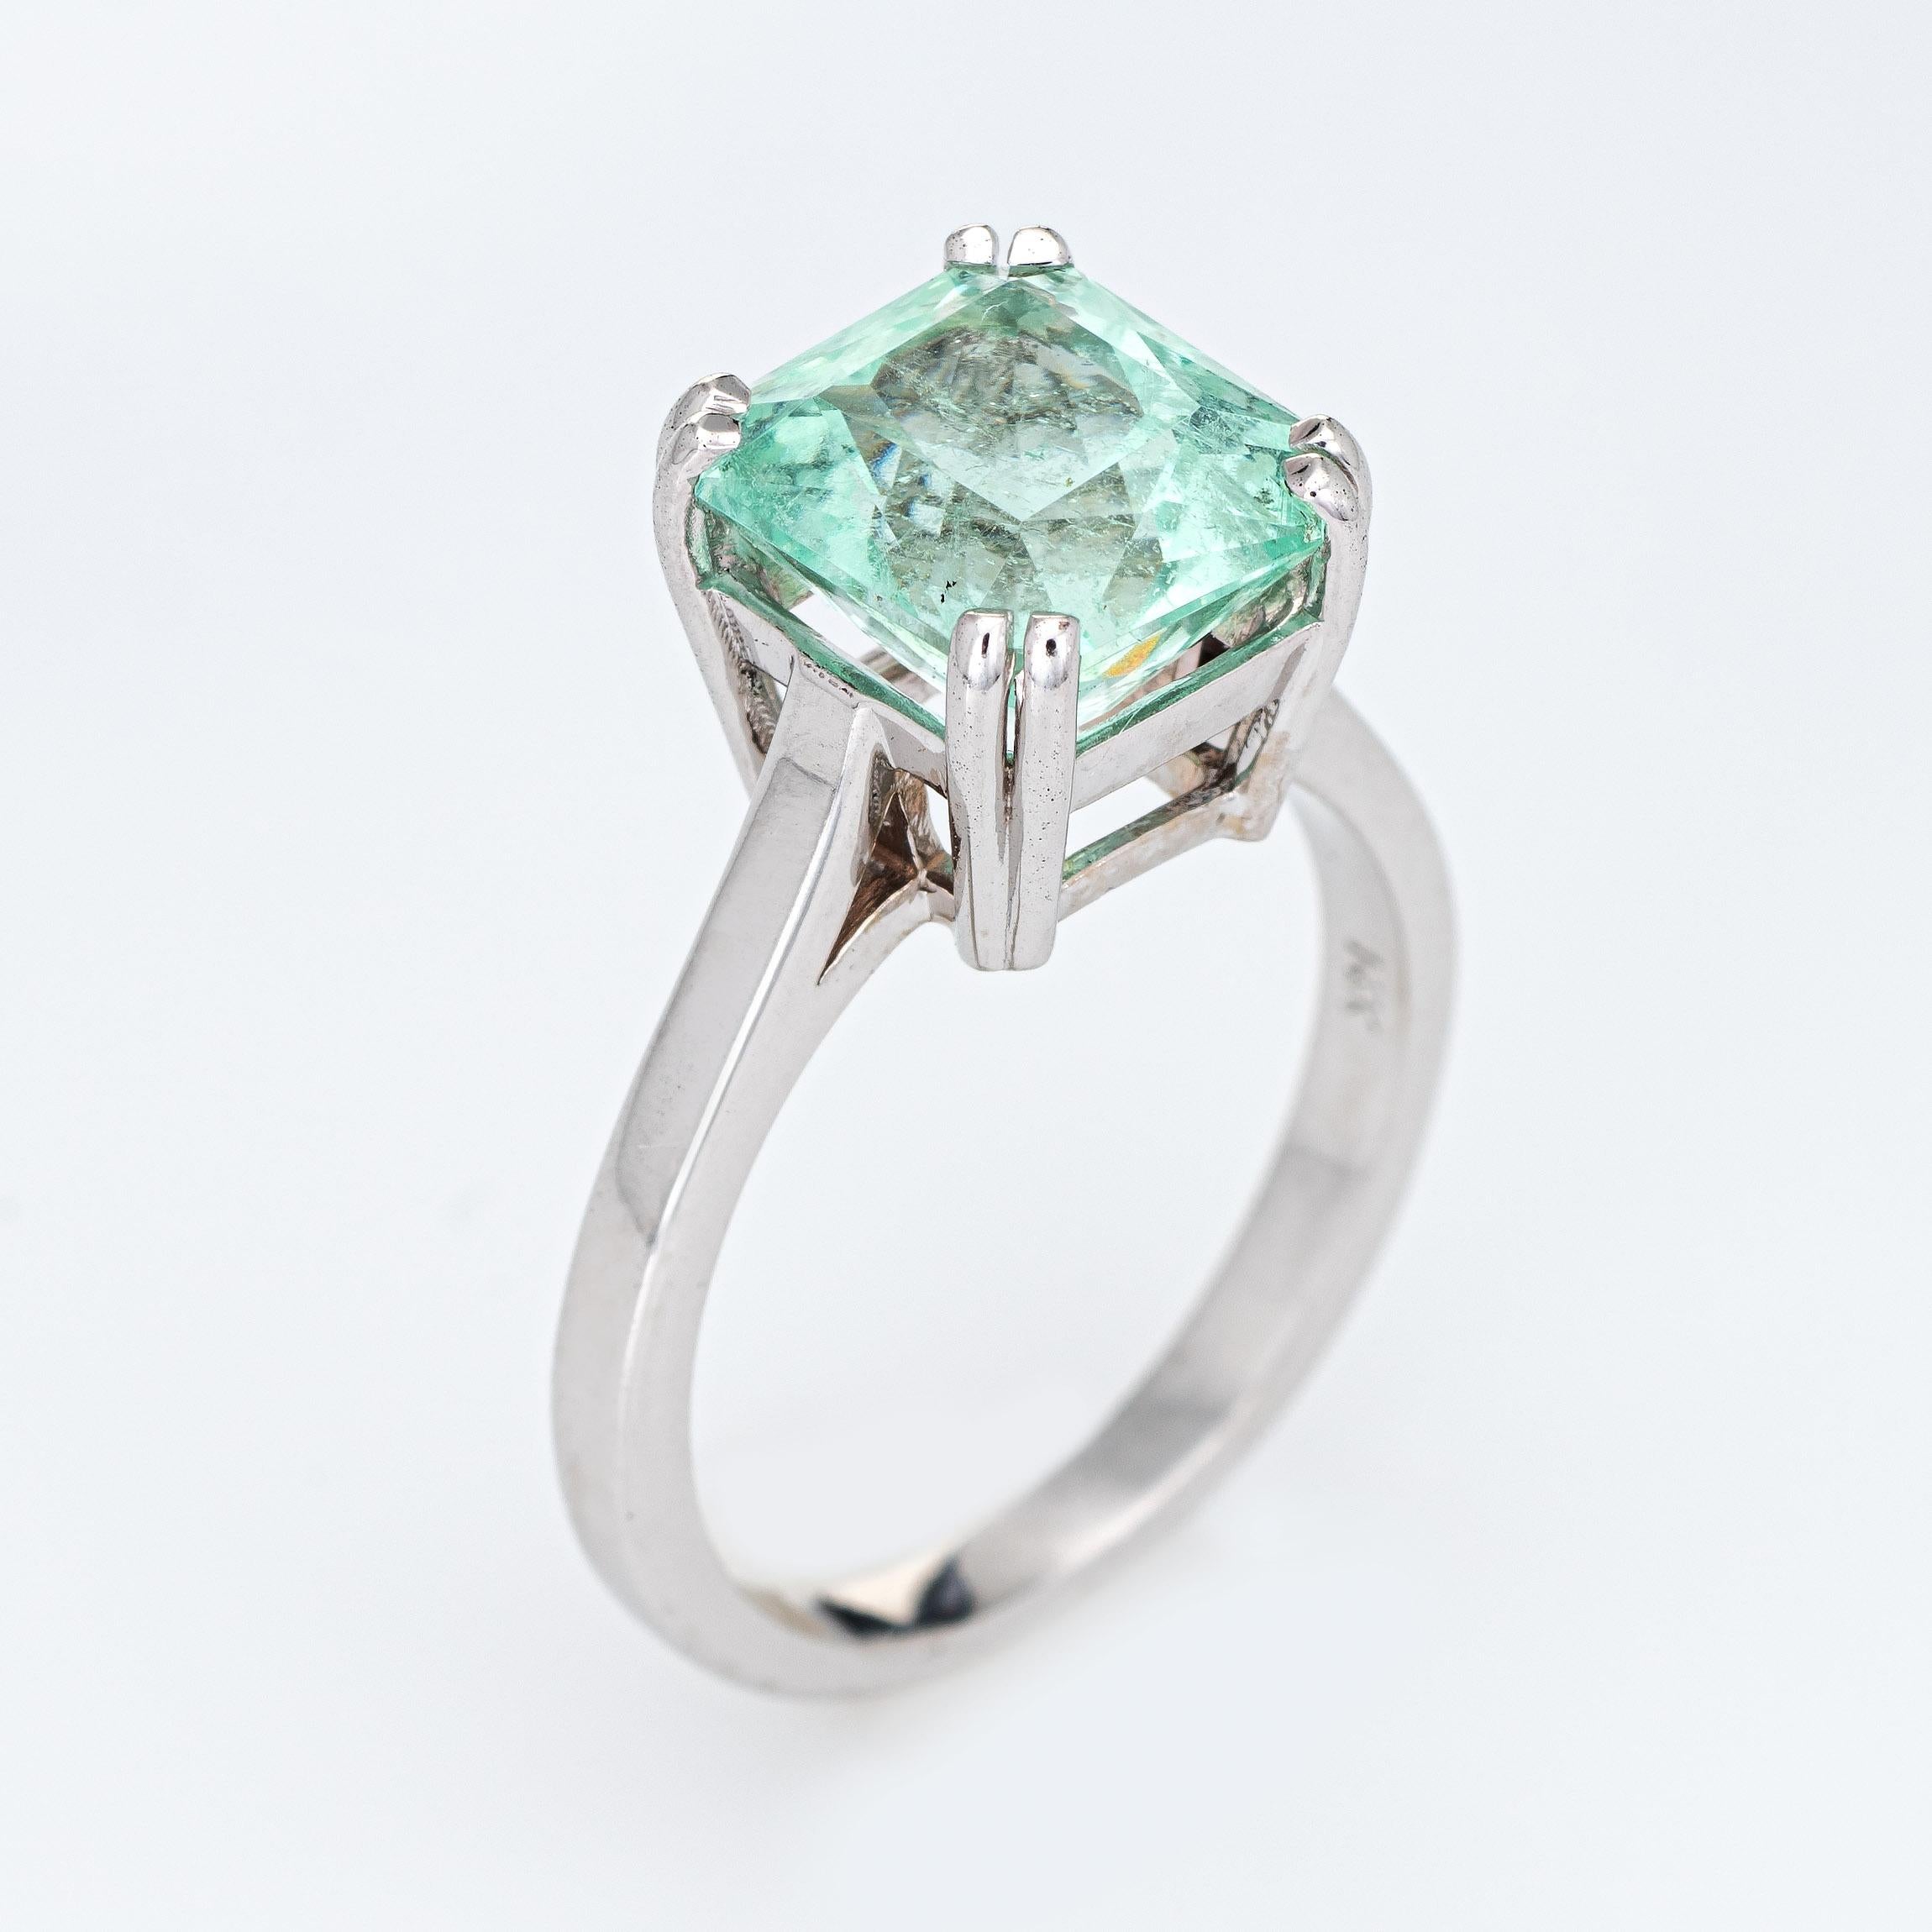 Stylish mint green emerald ring (circa 2000s) crafted in 14k white gold. 

Emerald cut emerald measures 9.5mm x 7.5mm (estimated at 4 carats). The emerald is in excellent condition and free of cracks or chips. 

The light mint green emerald is